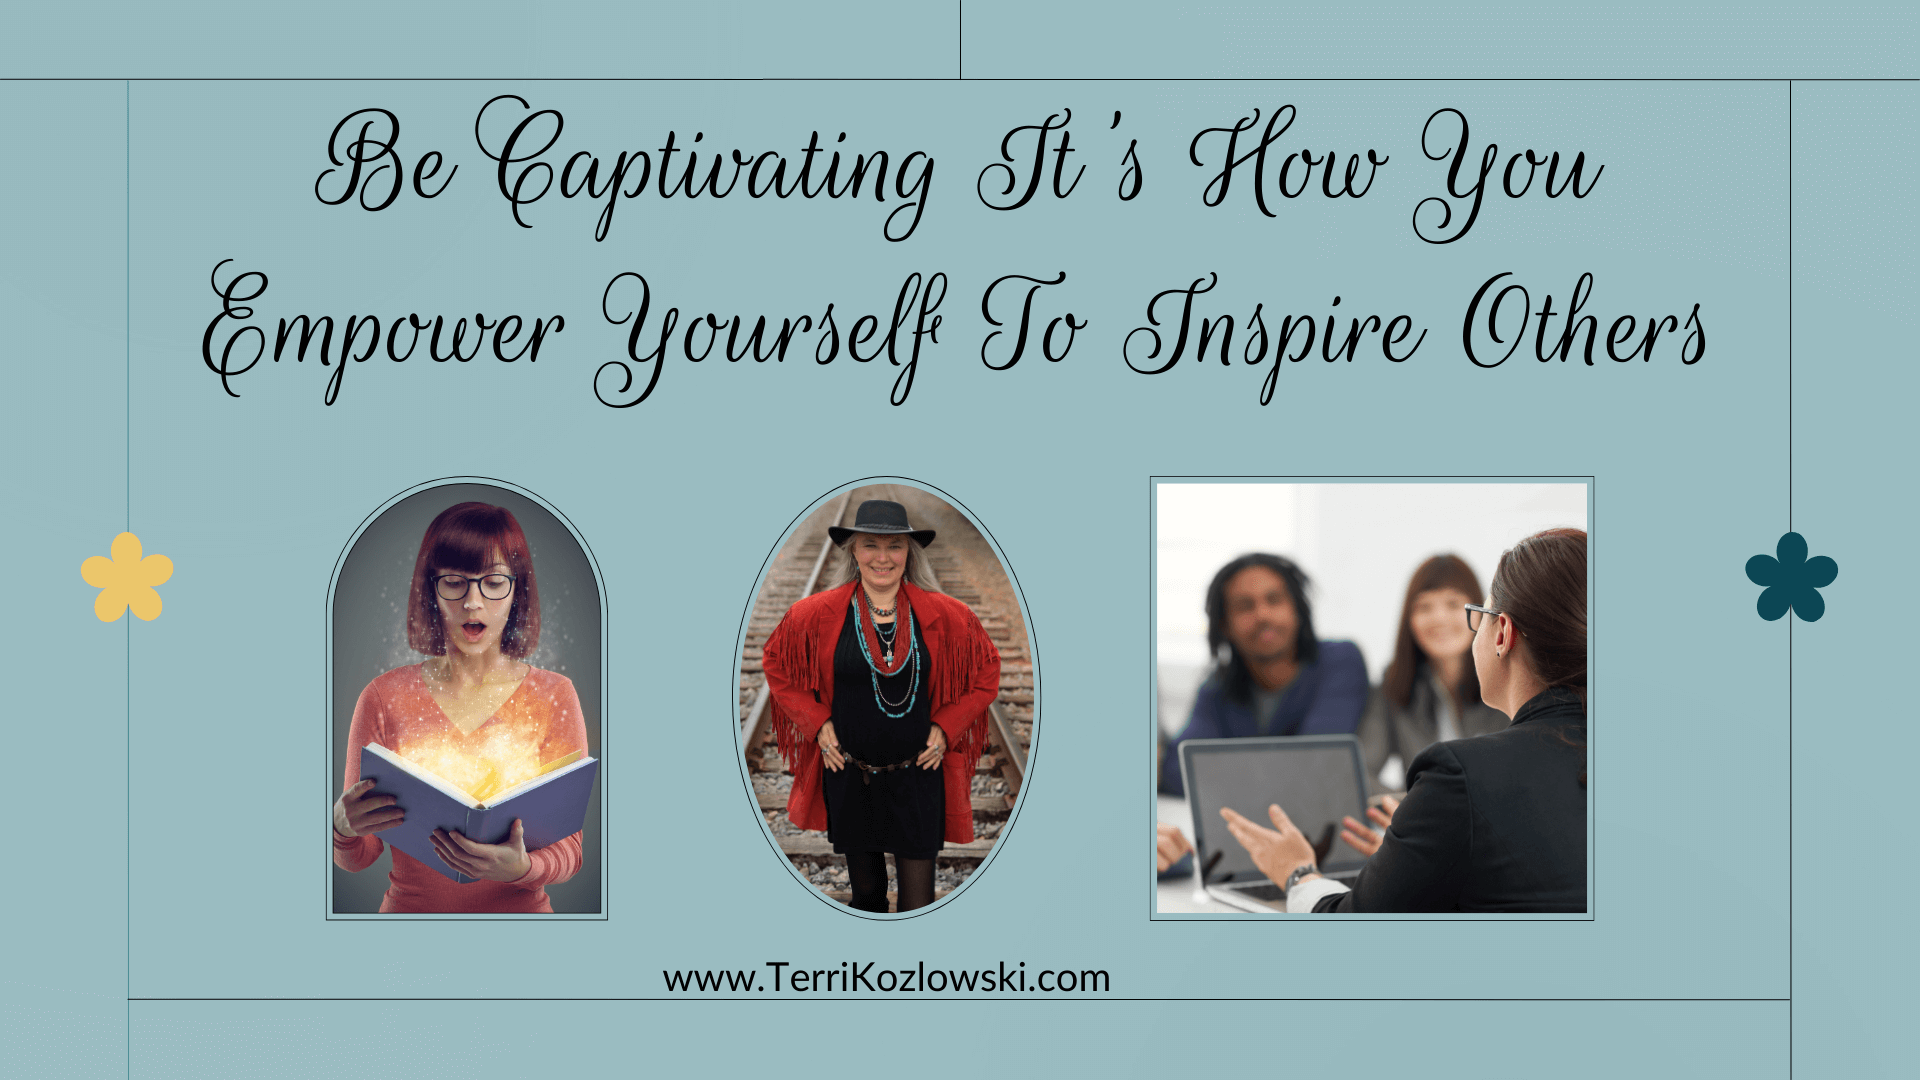 Be Captivating It's How You Empower Yourself To Inspire Others